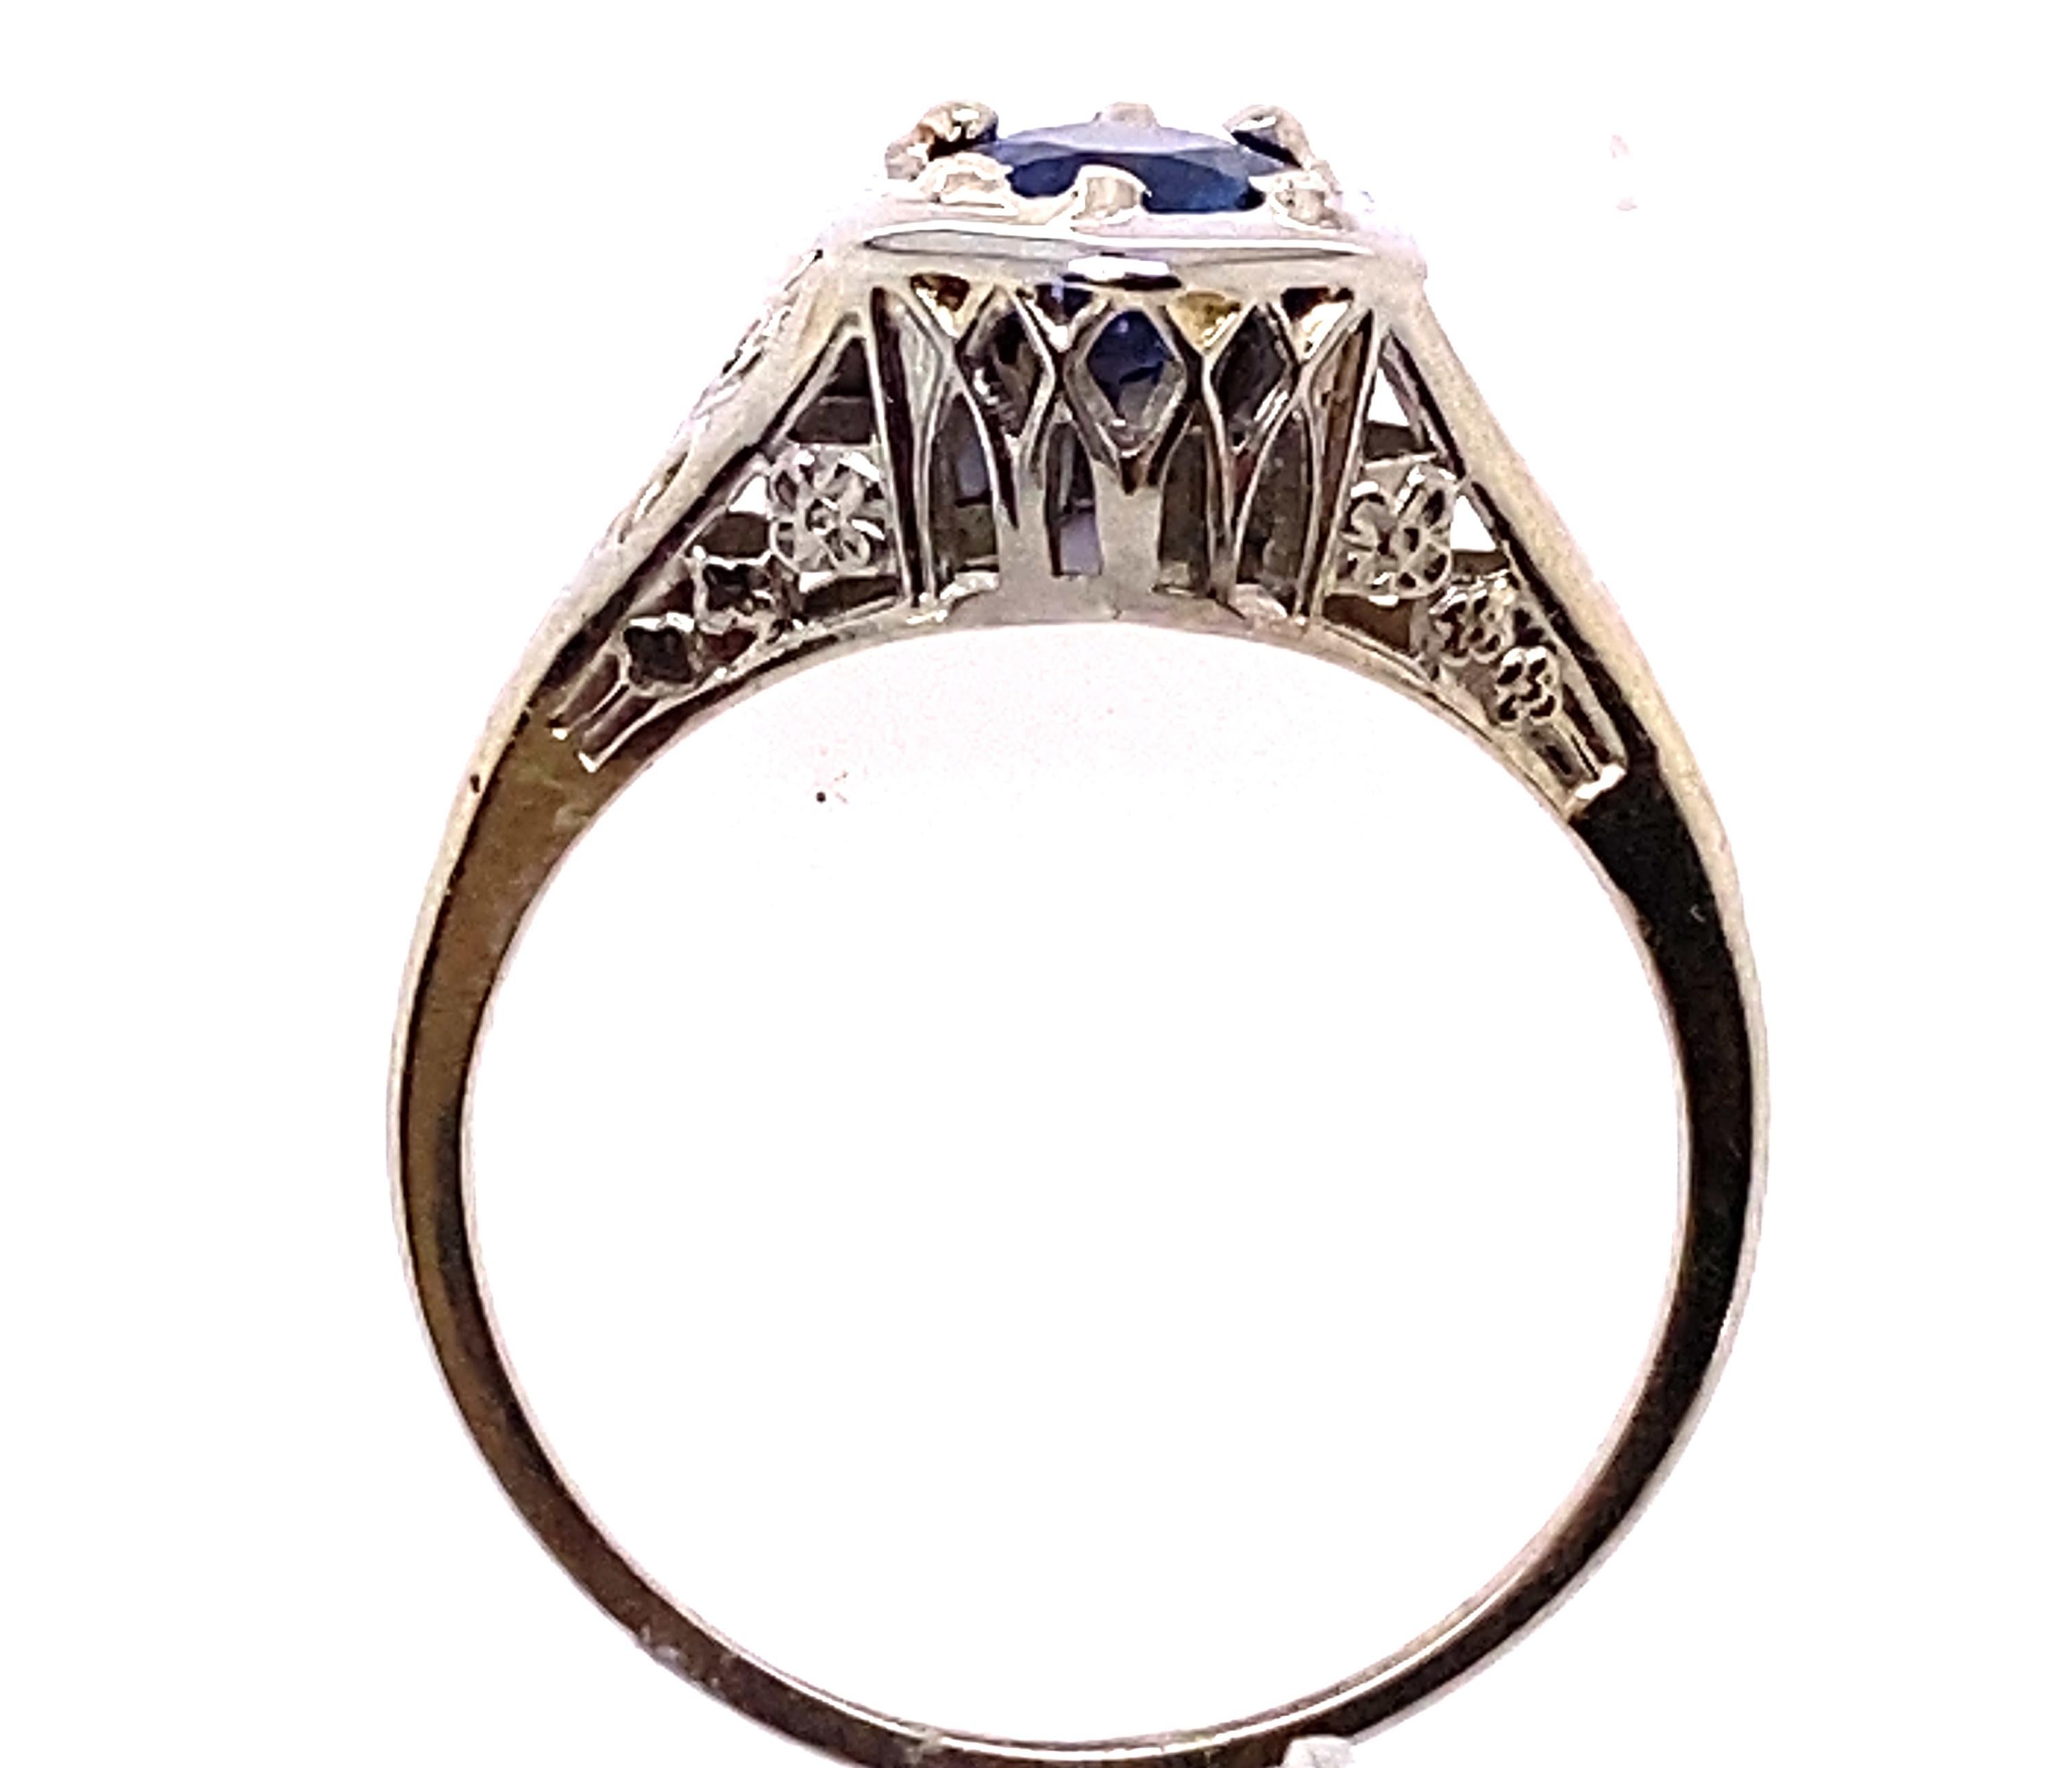 Vintage Antique .90ct Sapphire 18K White Gold Art Deco Engagement Ring



Featuring a Stunning .90ct Genuine Natural Blue Round Sapphire Center

Circa 1920's-1930's

The Art Deco Era in Jewelry Design

Genuine Antique; Not a Reproduction 

We Put On